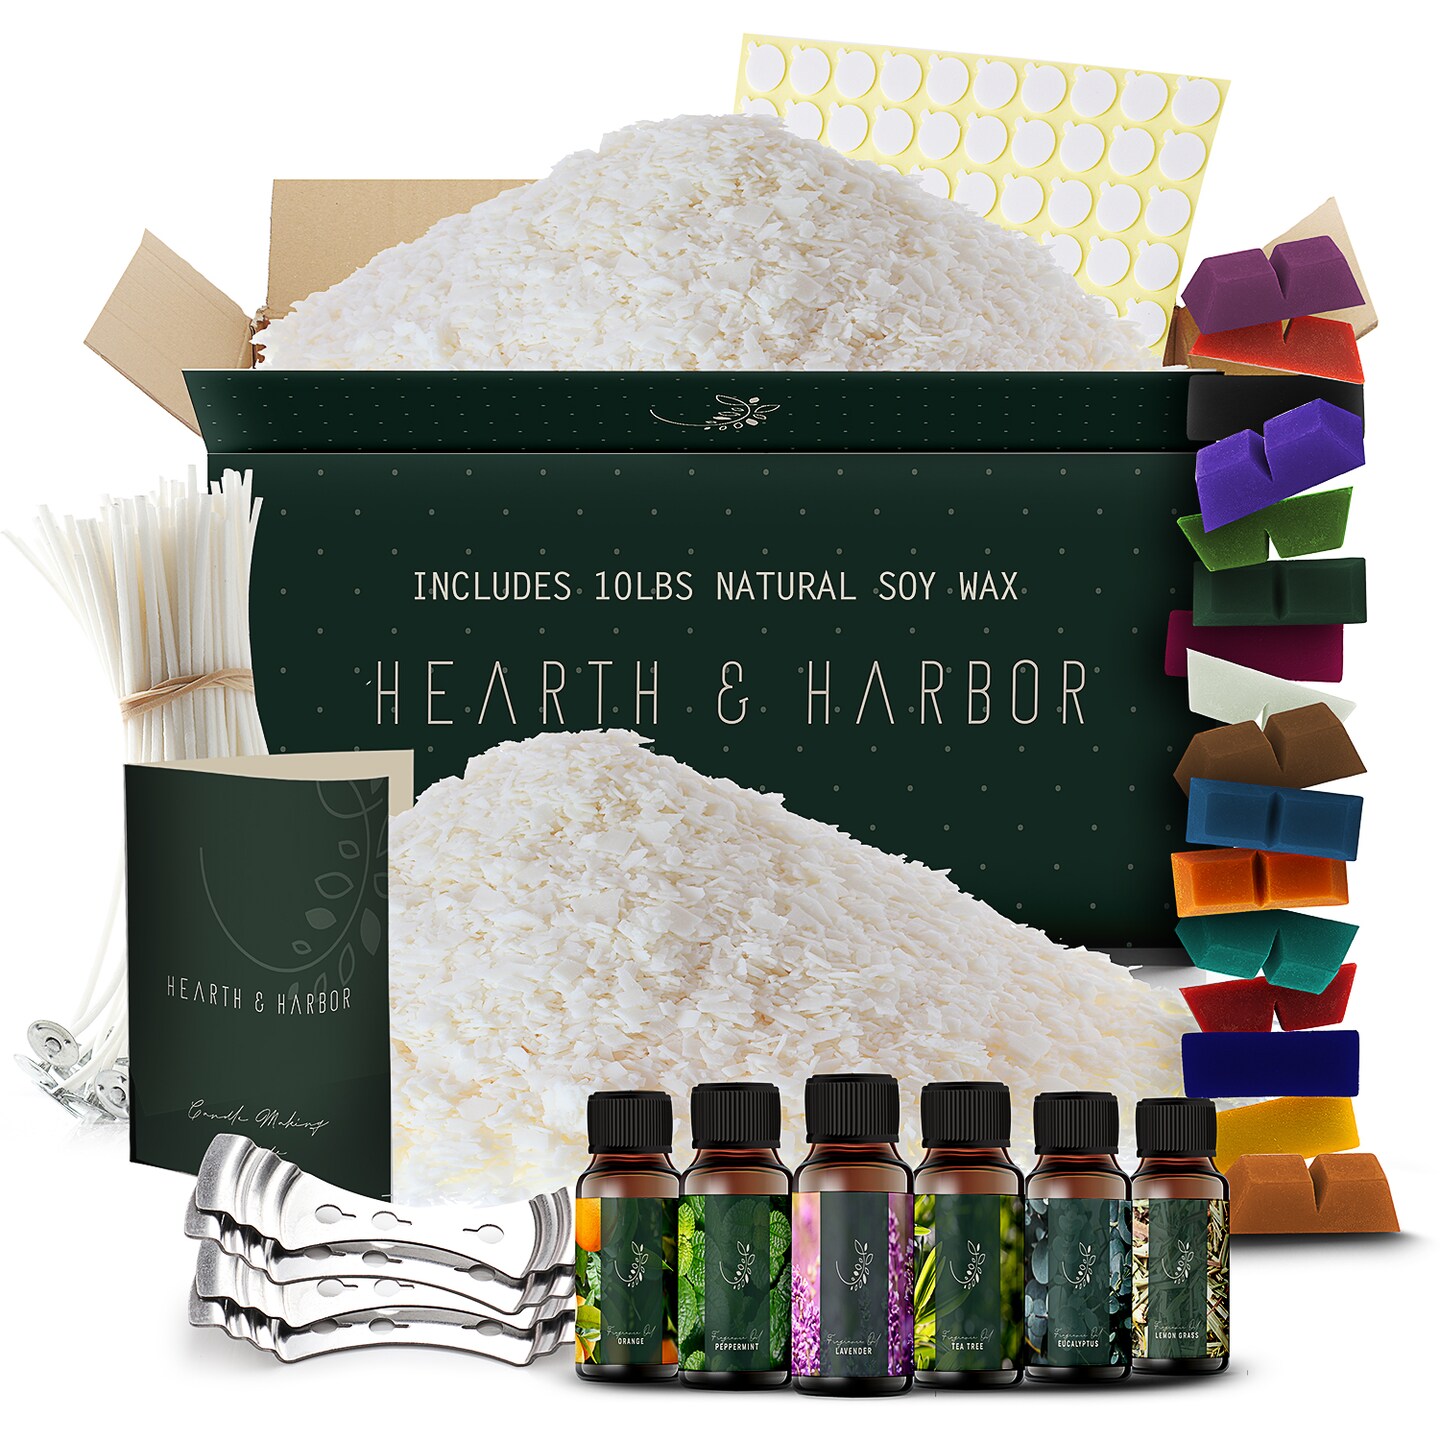 Hearth & Harbor DIY Candle Making Kit for Adults and Kids - Complete Candle Making Kit + 10lb Wax